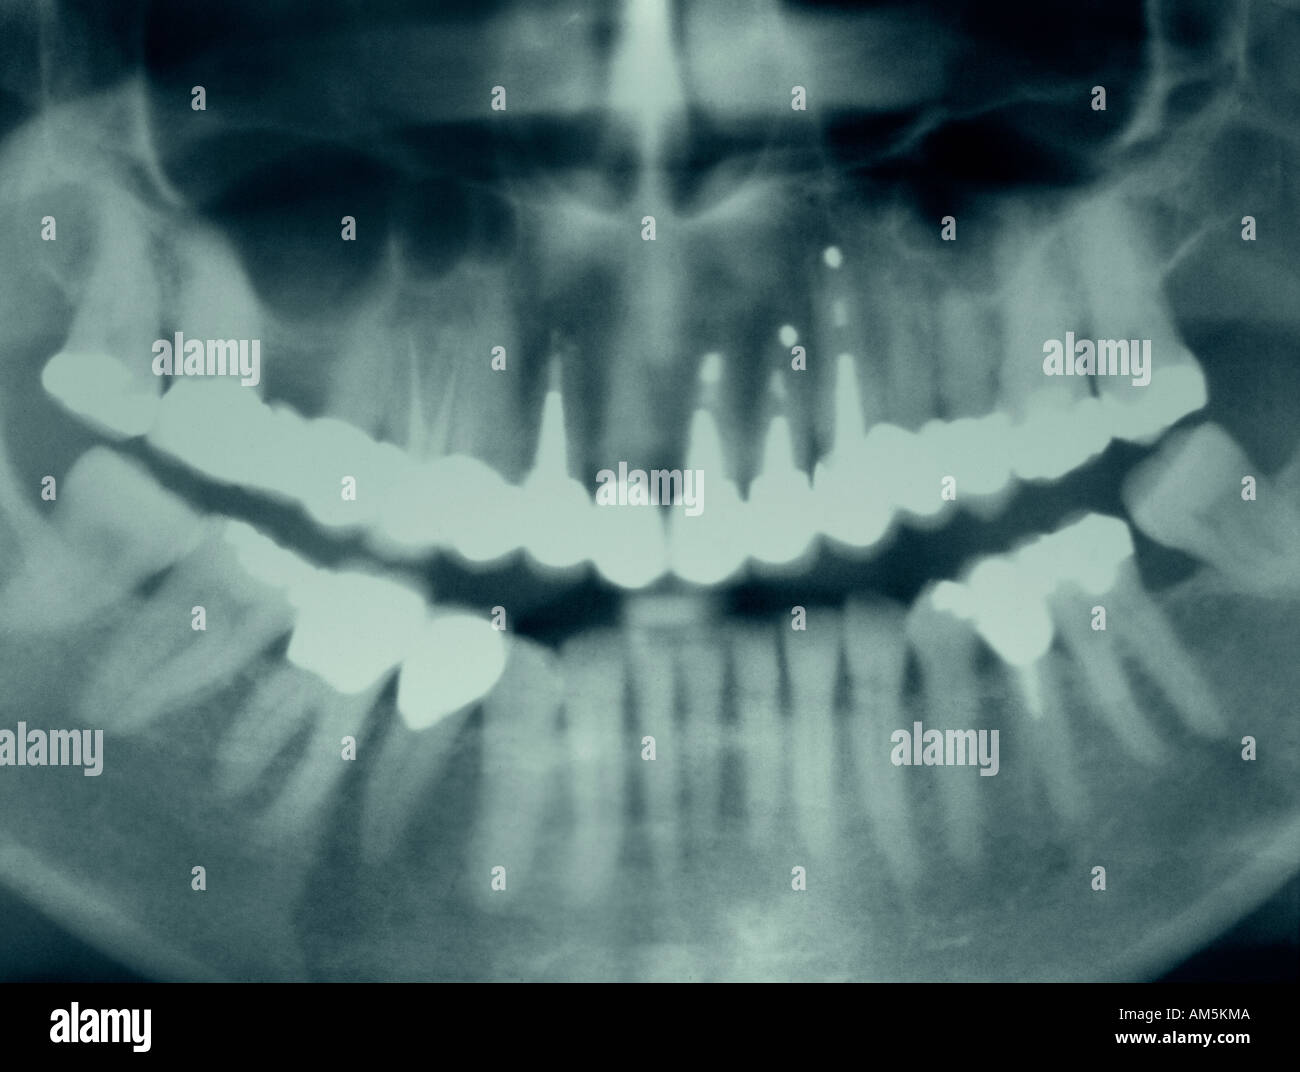 Dental xray x-ray film showing rows of traditional amalgam fillings and caps. Stock Photo